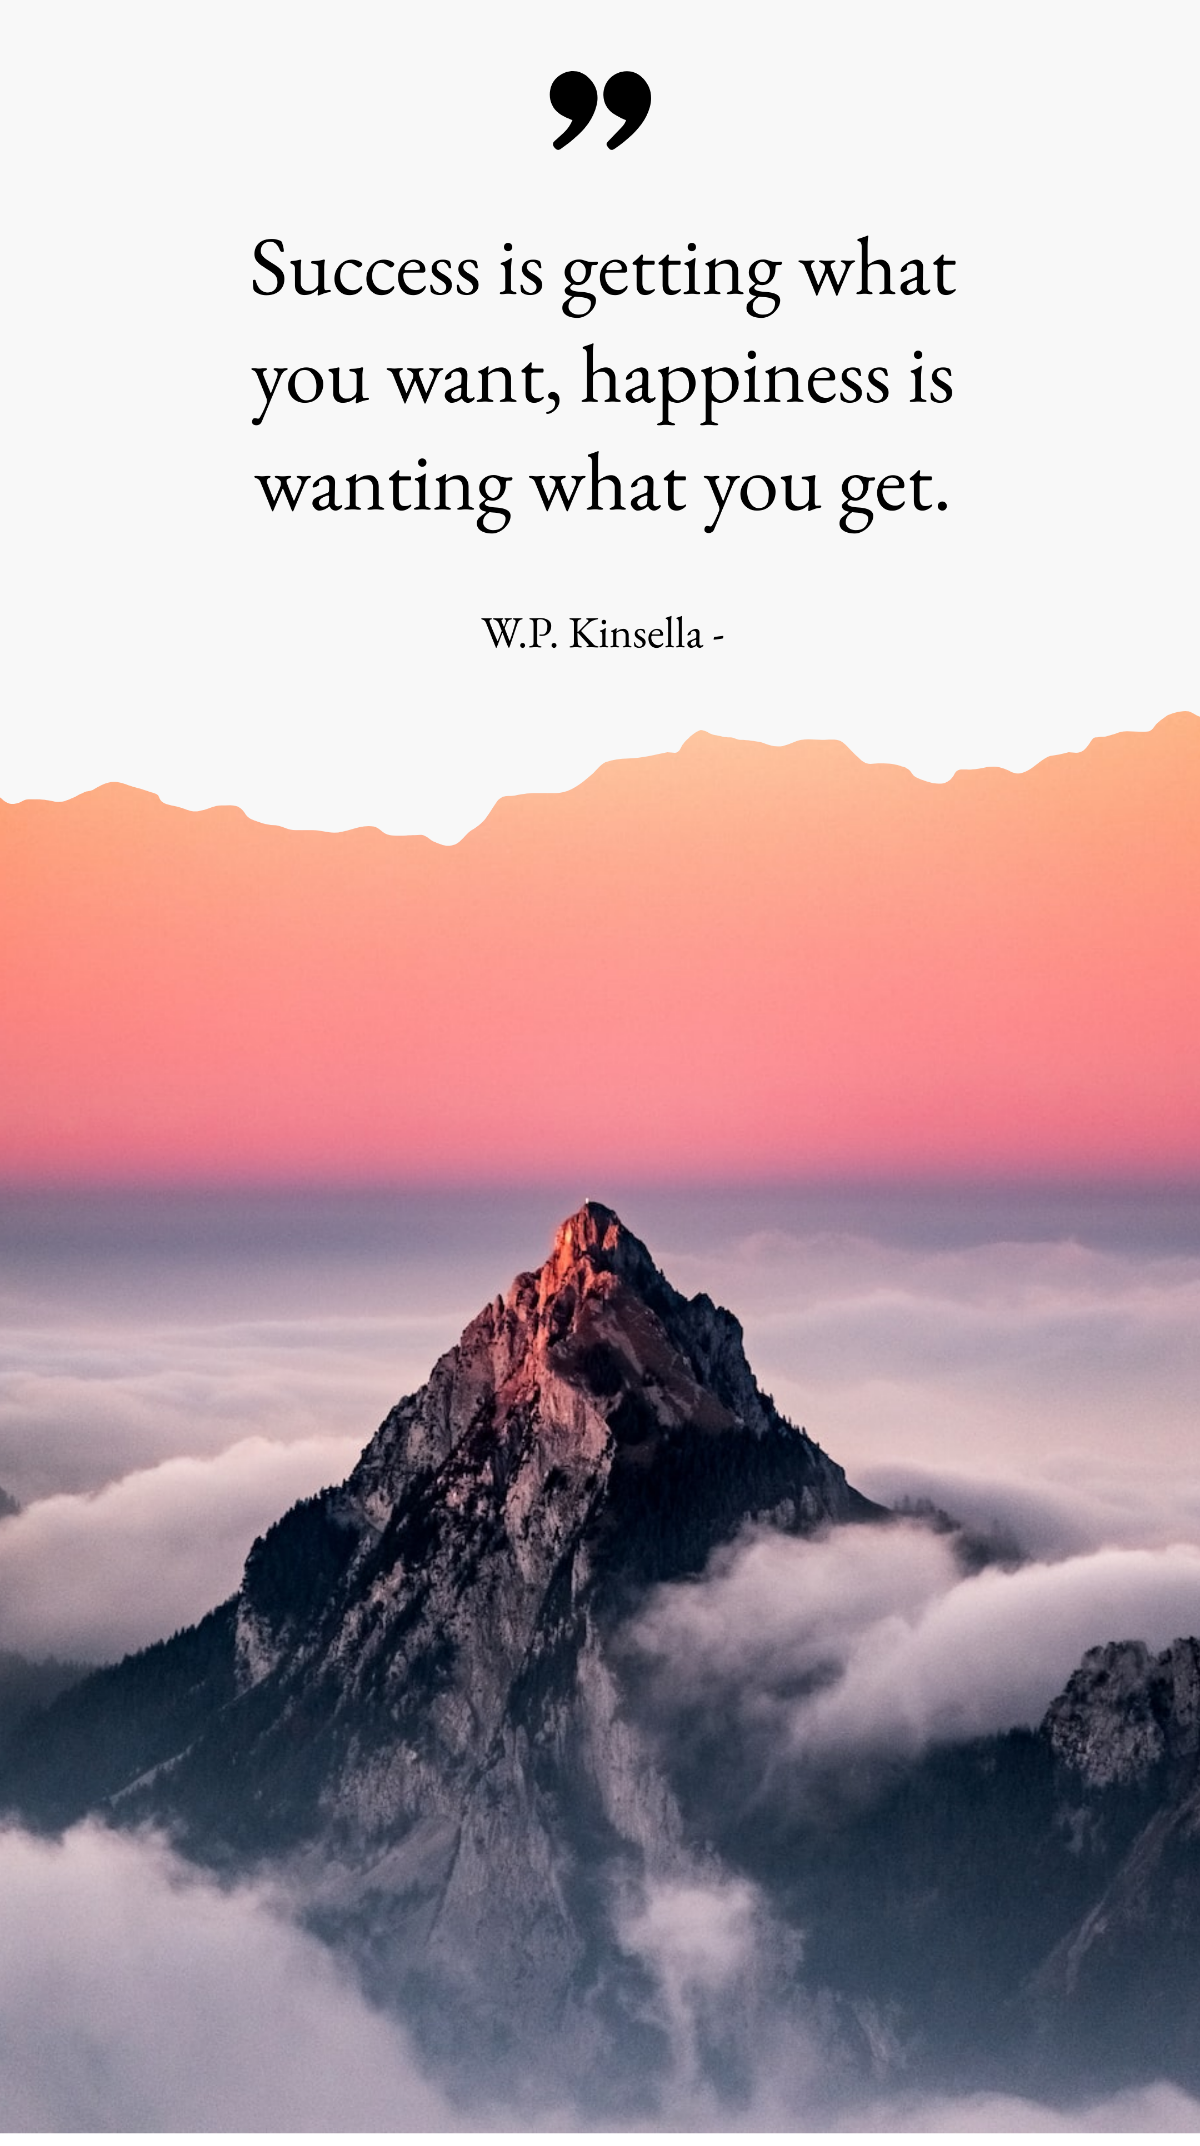 W.P. Kinsella - Success is getting what you want, happiness is wanting what you get. Template